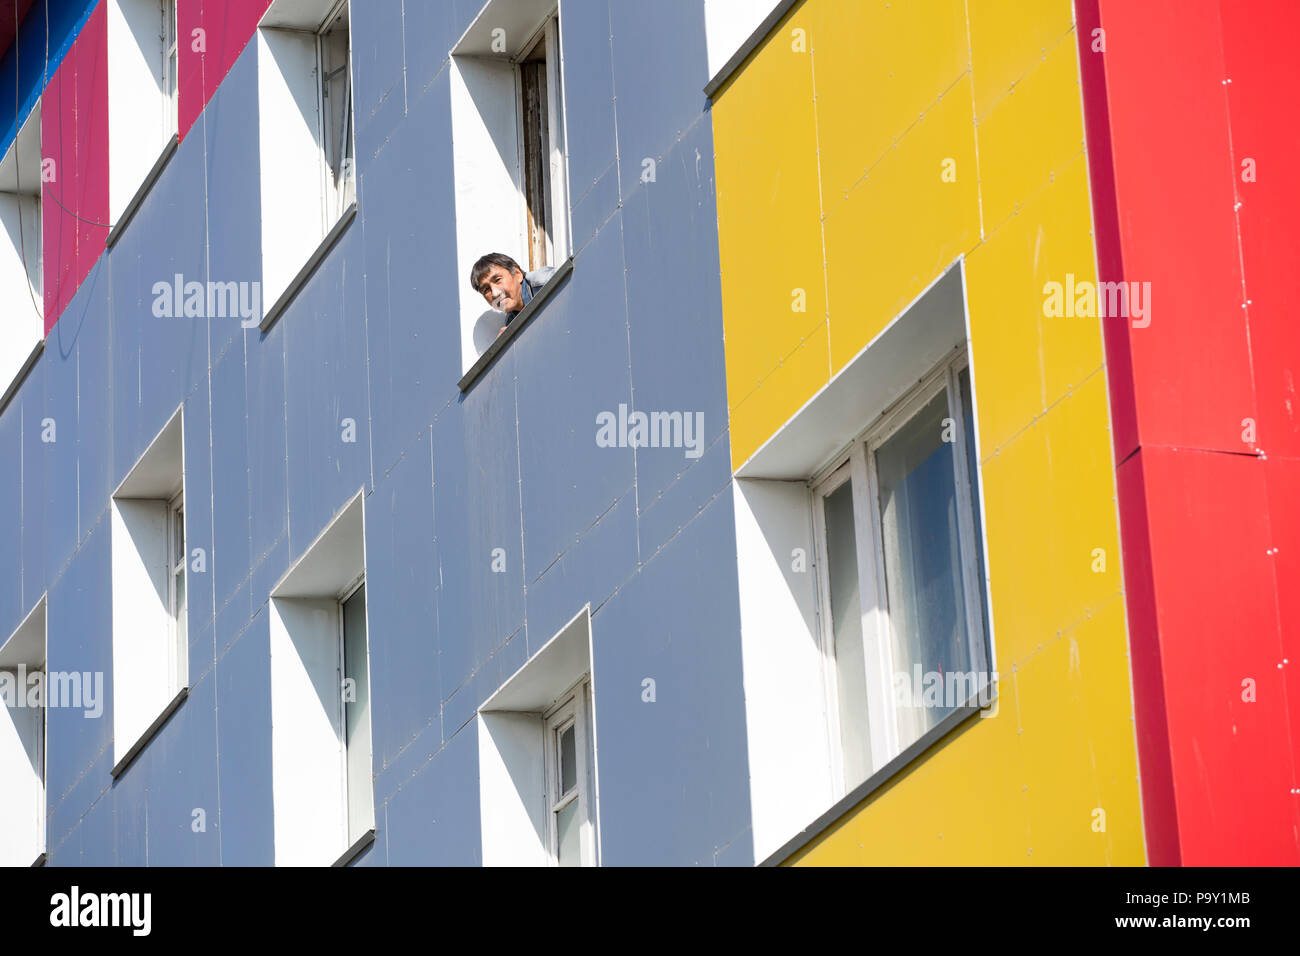 Man peers out of window in colourful housing block in Provideniya, Russia Stock Photo